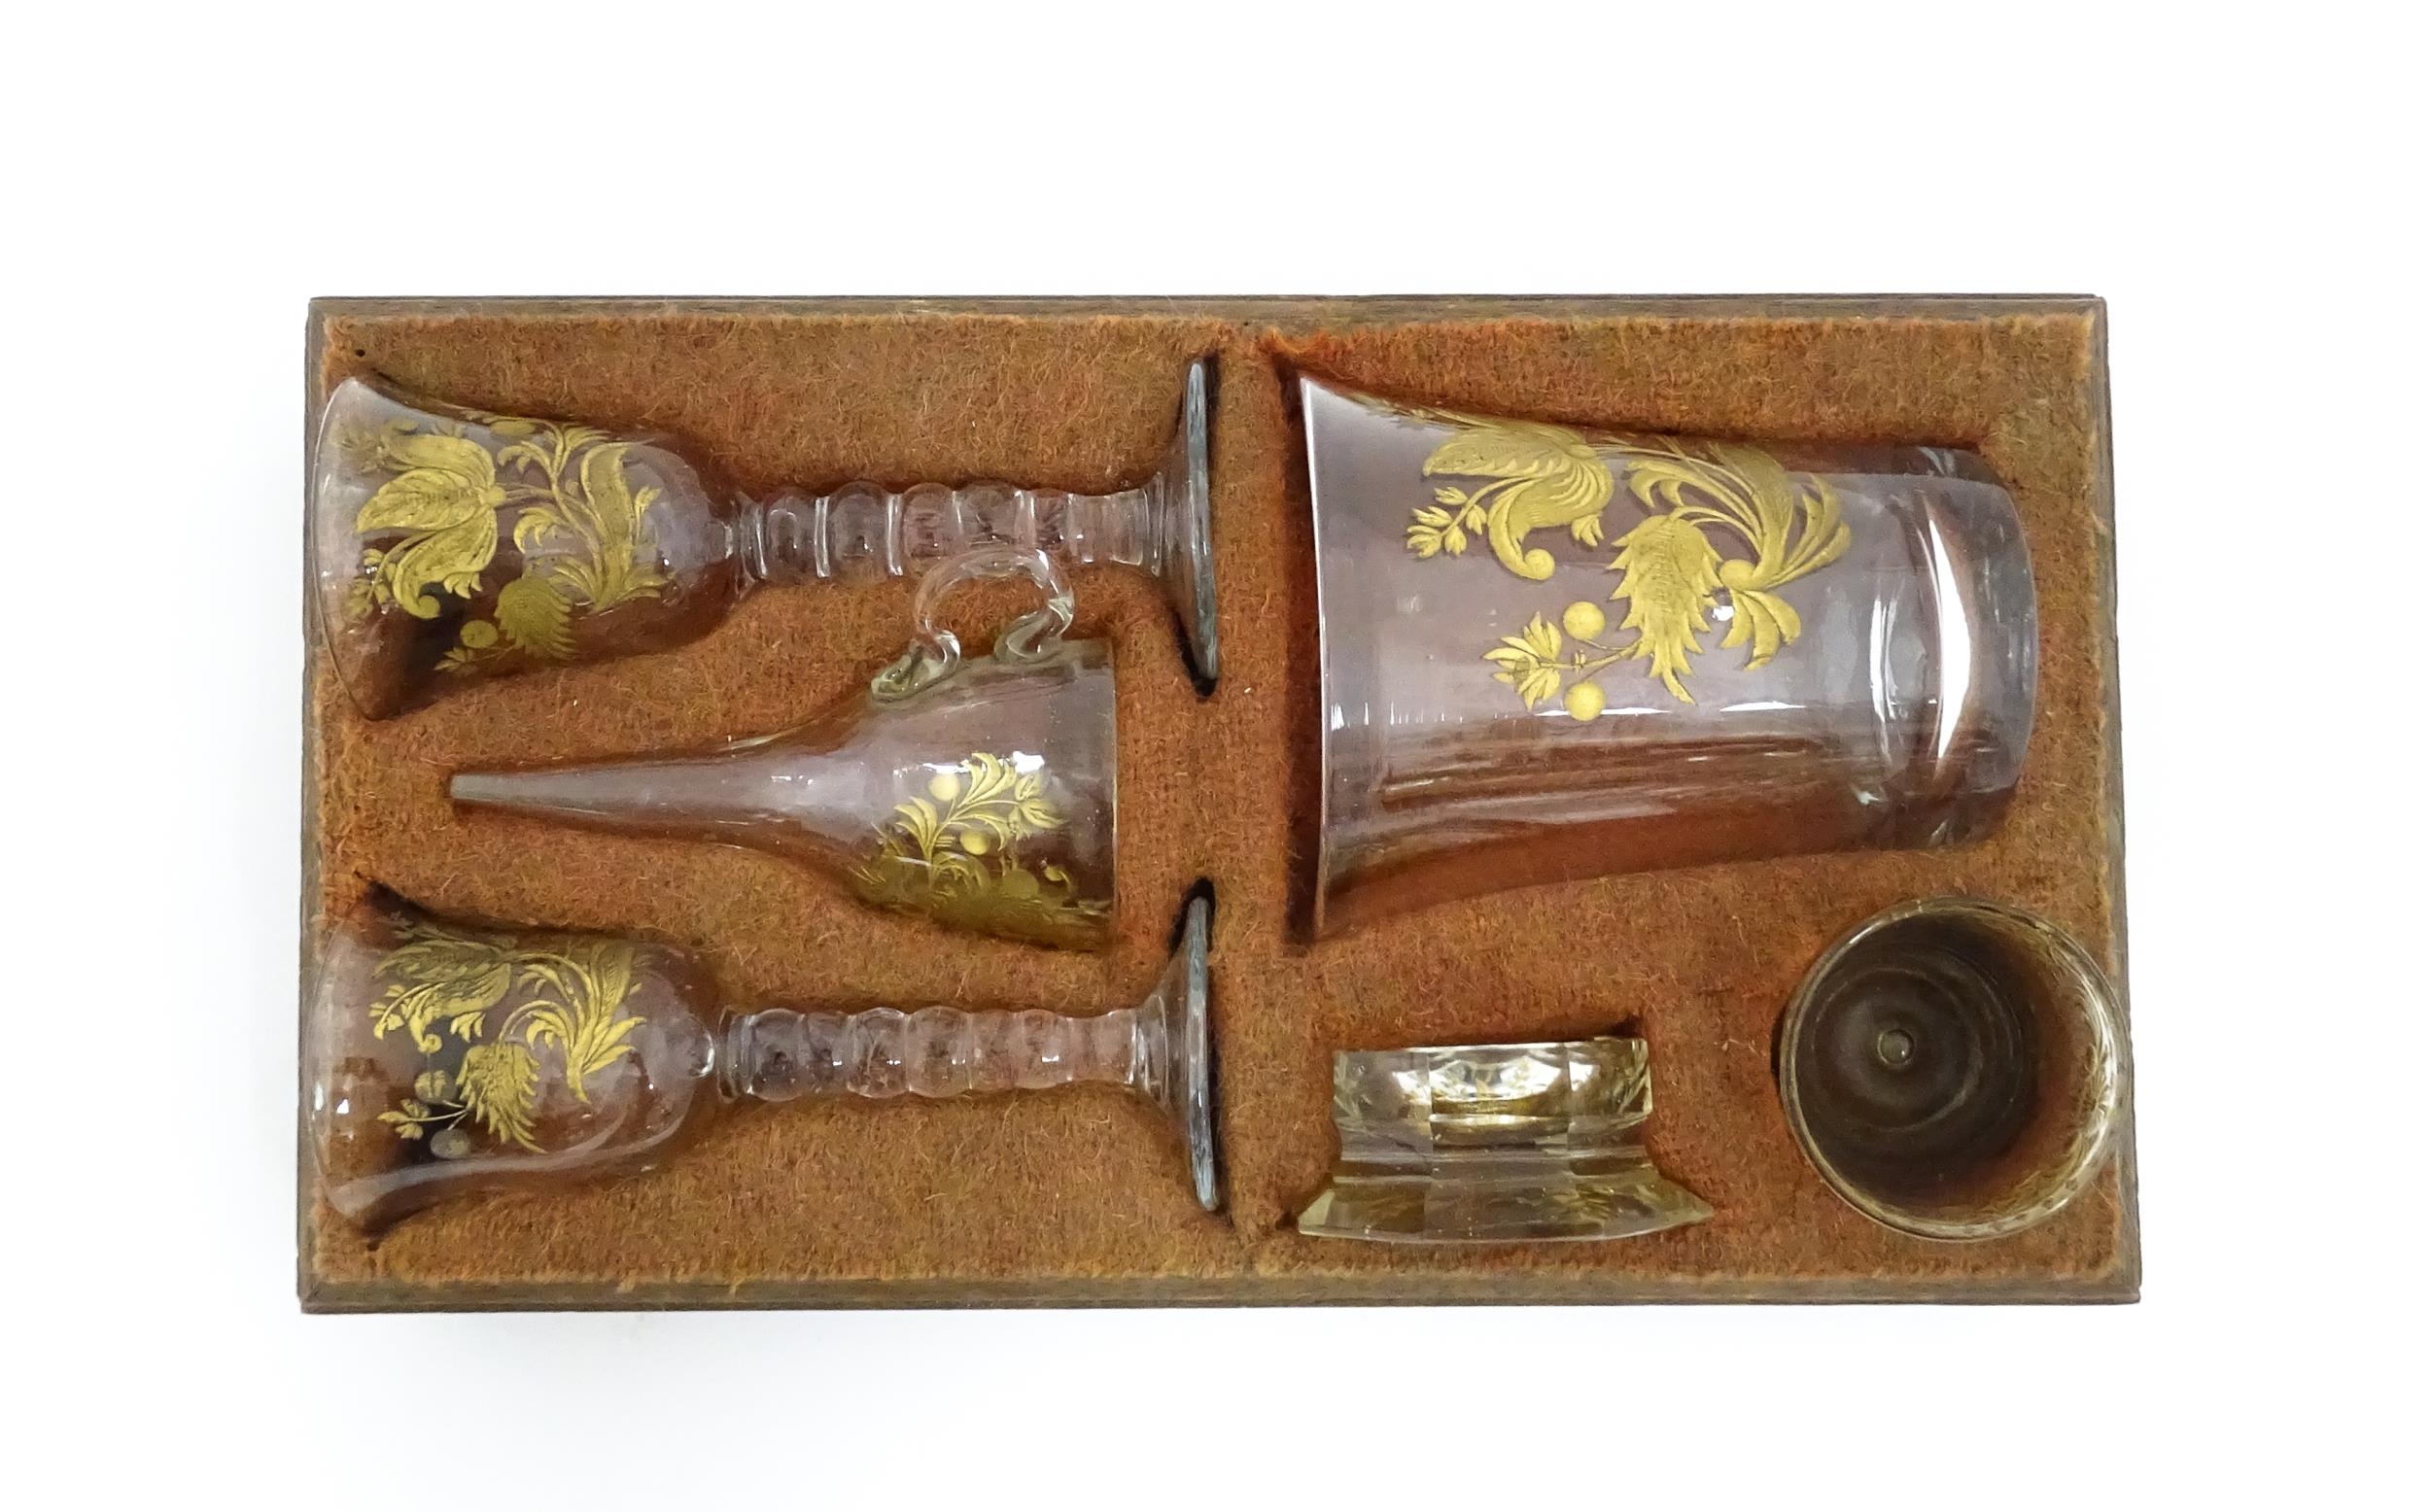 18thC glass to include 18thC wine glasses, beakers, funnel, etc. with engraved gilt foliate and - Image 2 of 11